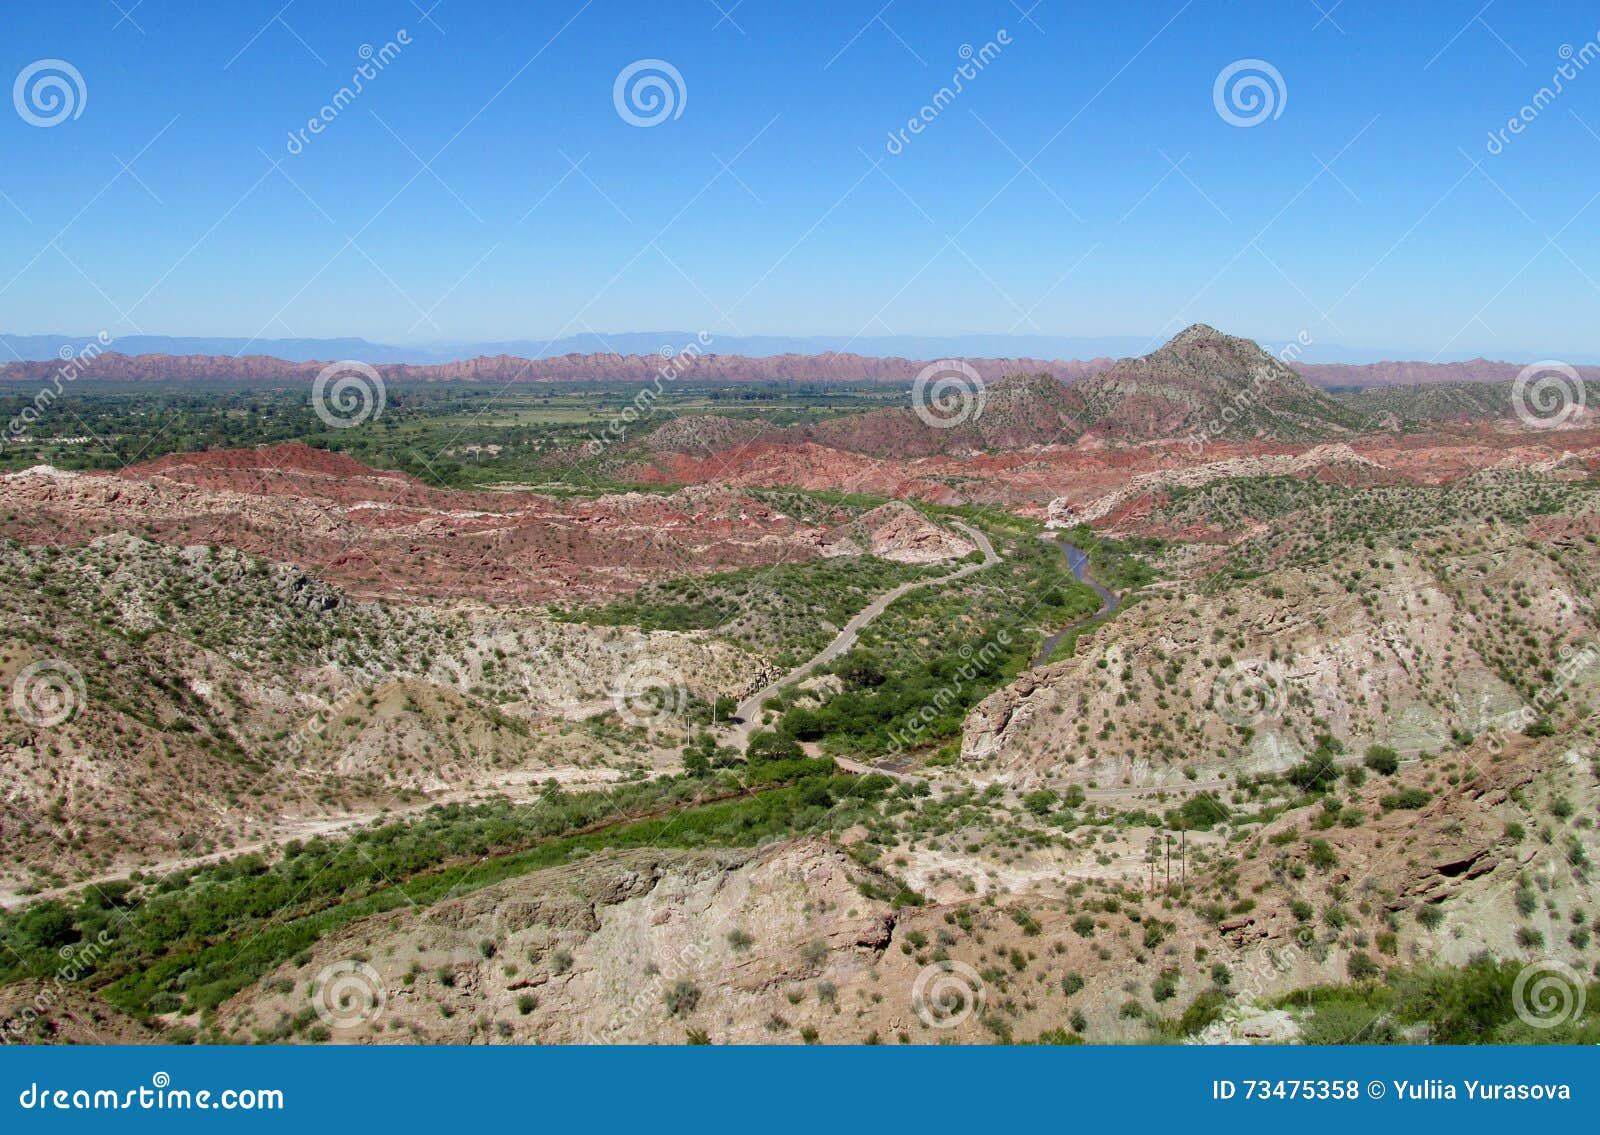 red rocks and green valley mountain landscape